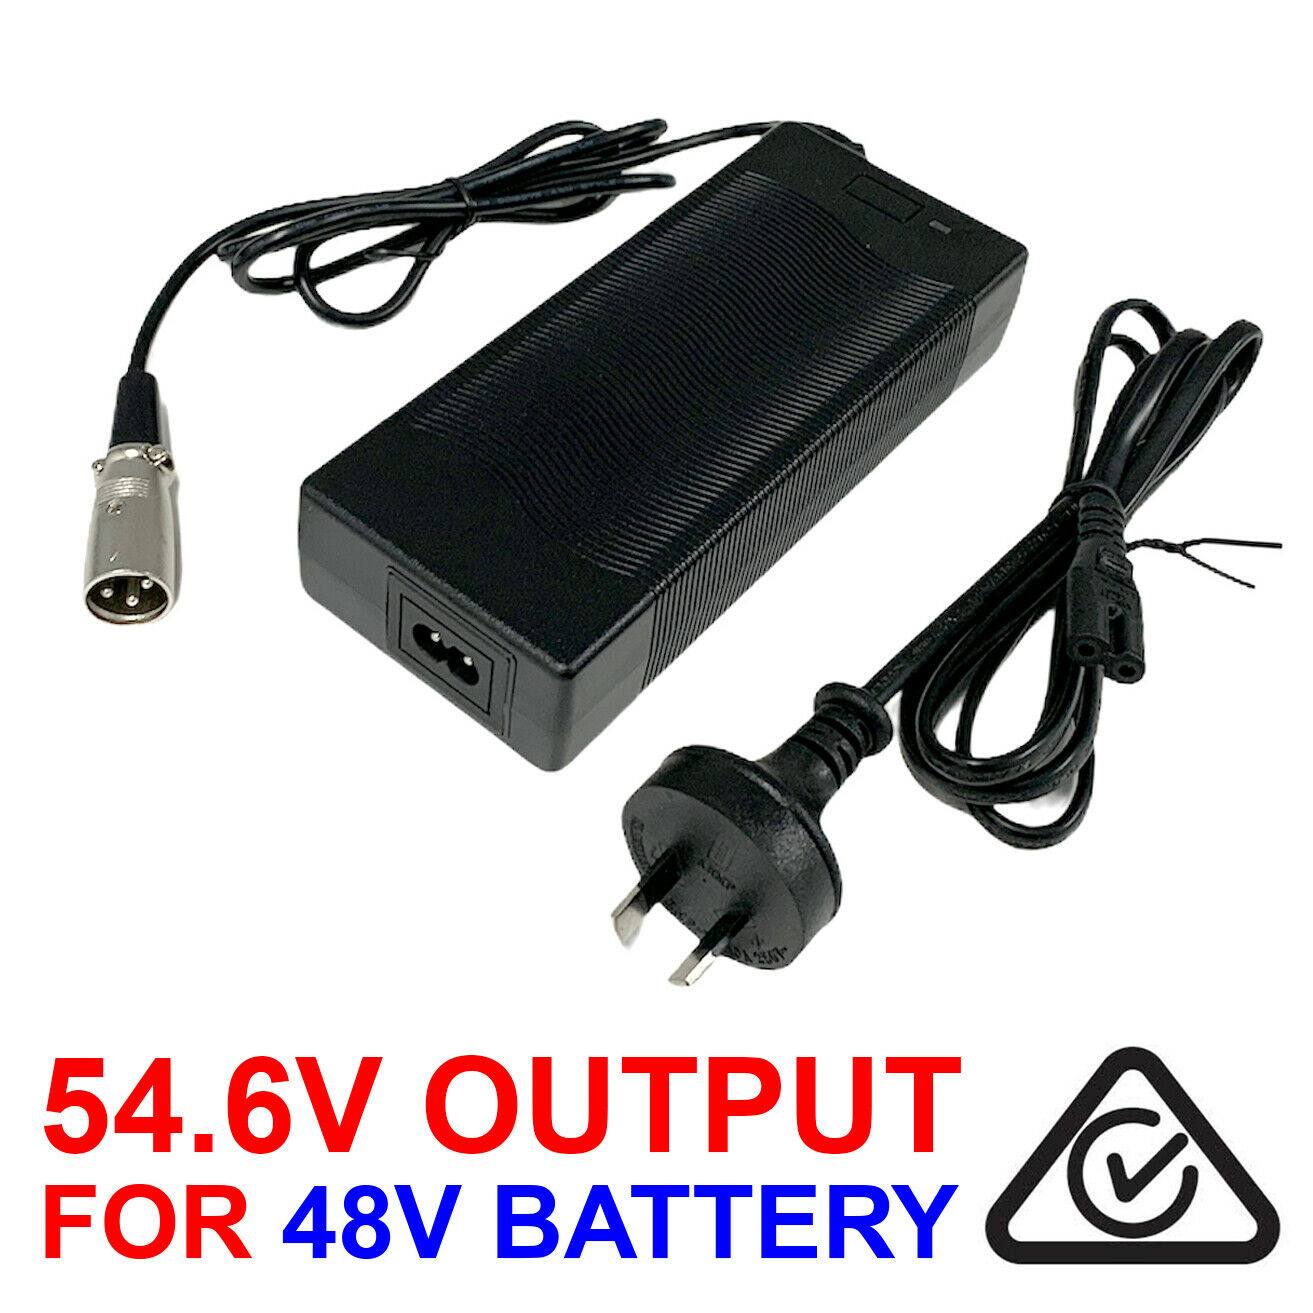 54.6V Battery Charger for Electric Bike, 48V 2A Power Supply for